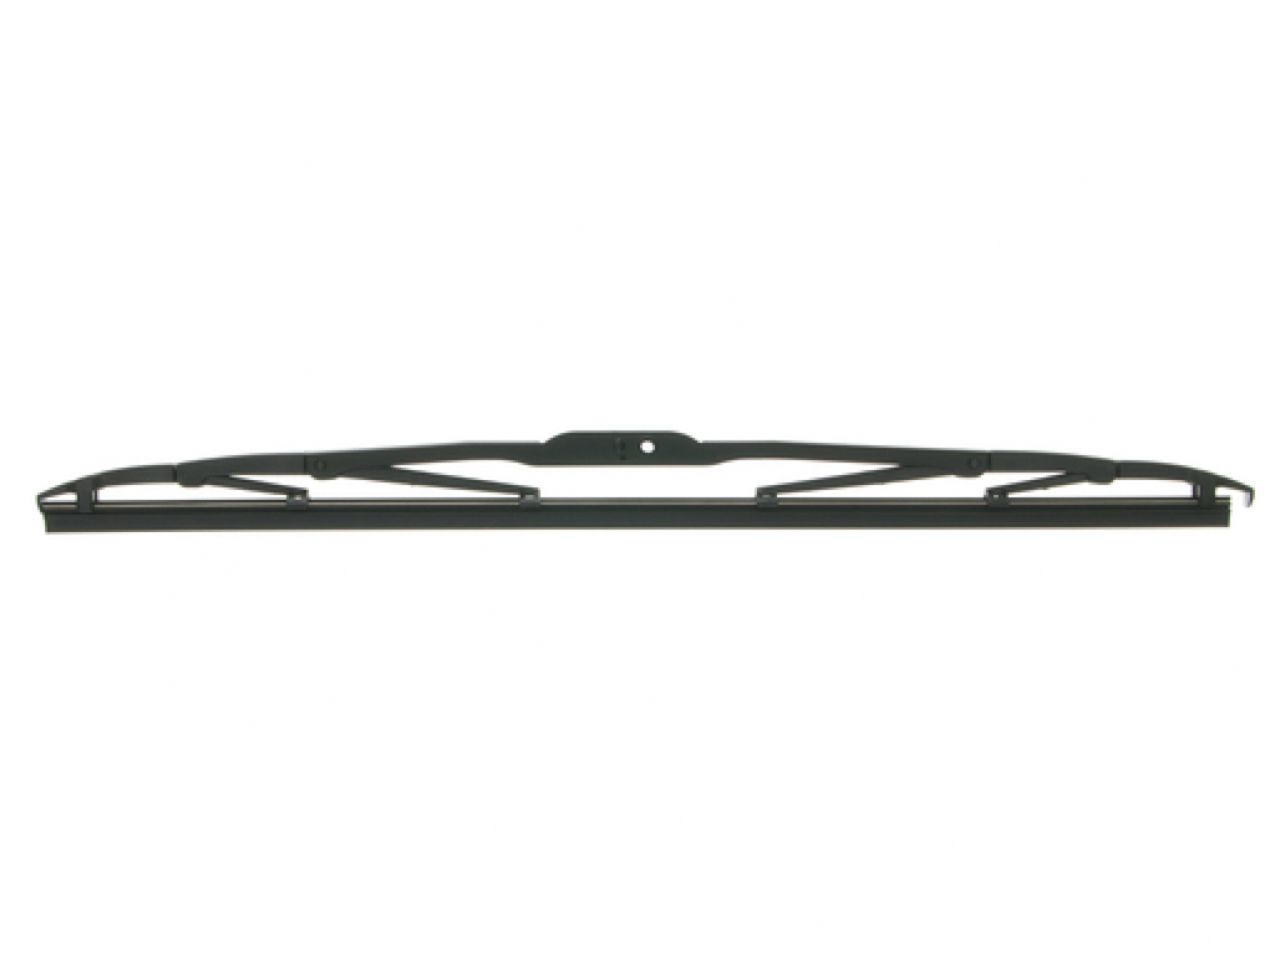 Anco Windshield Wipers 31-17 Item Image